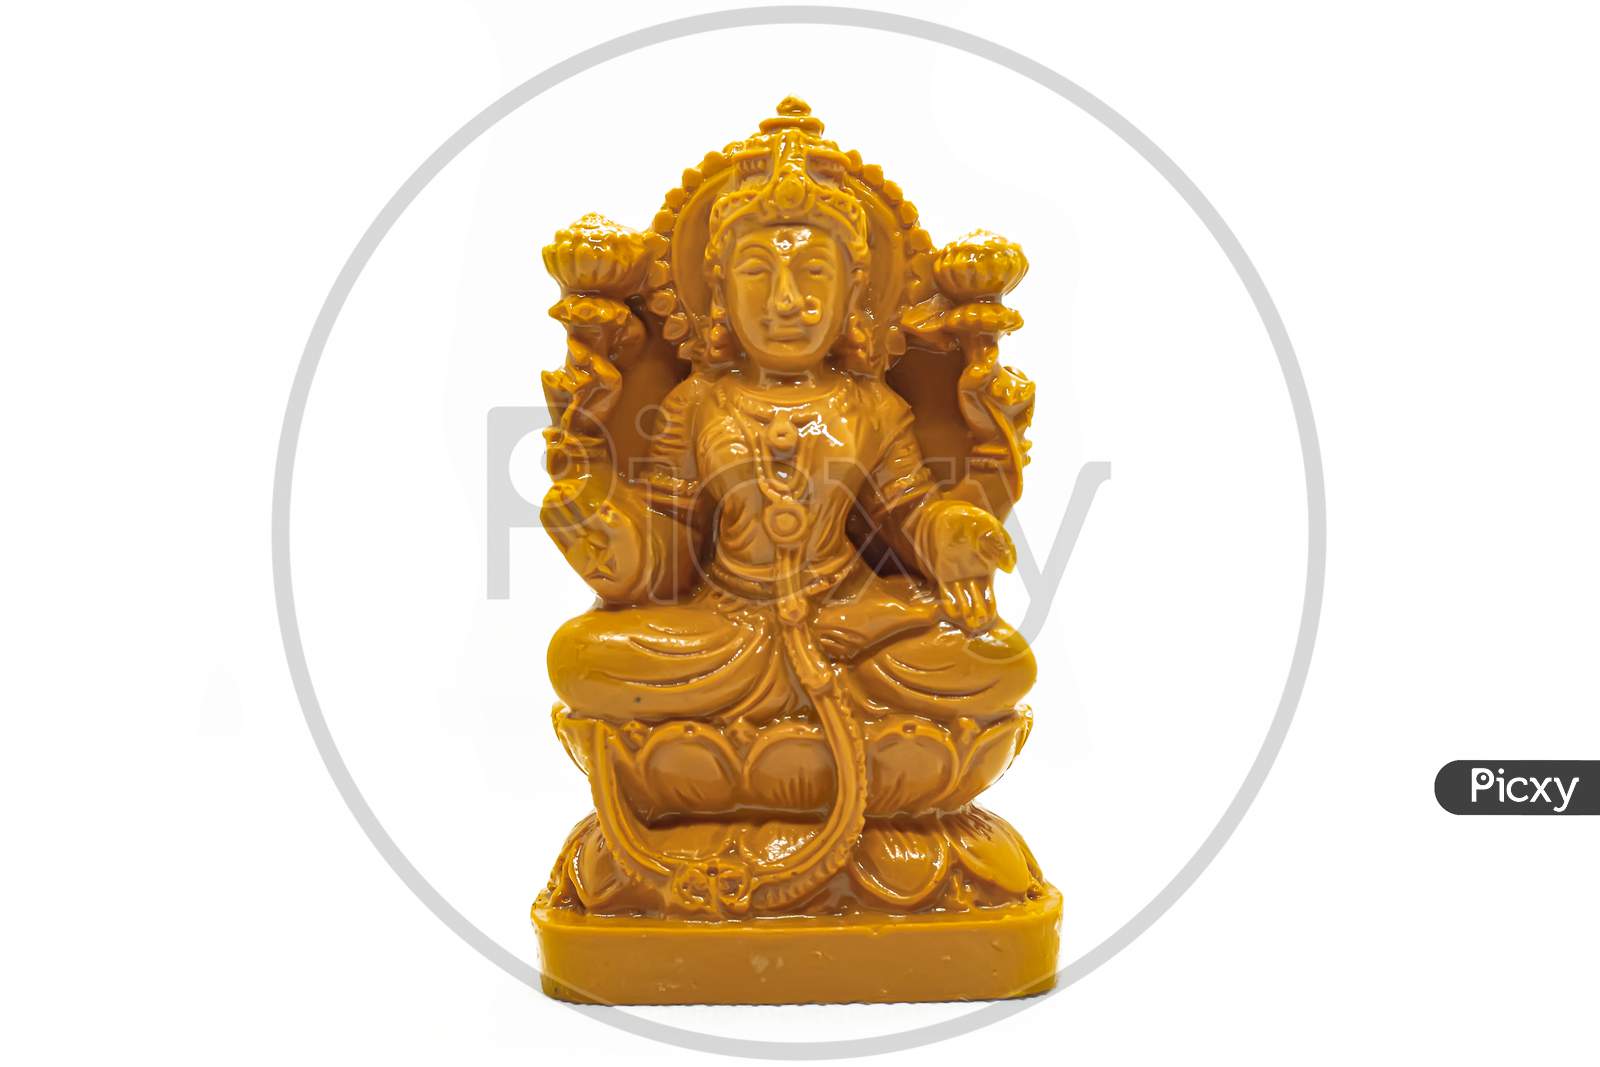 The Statue Of Mahalakshmi Carved In Wood Is Isolated In White